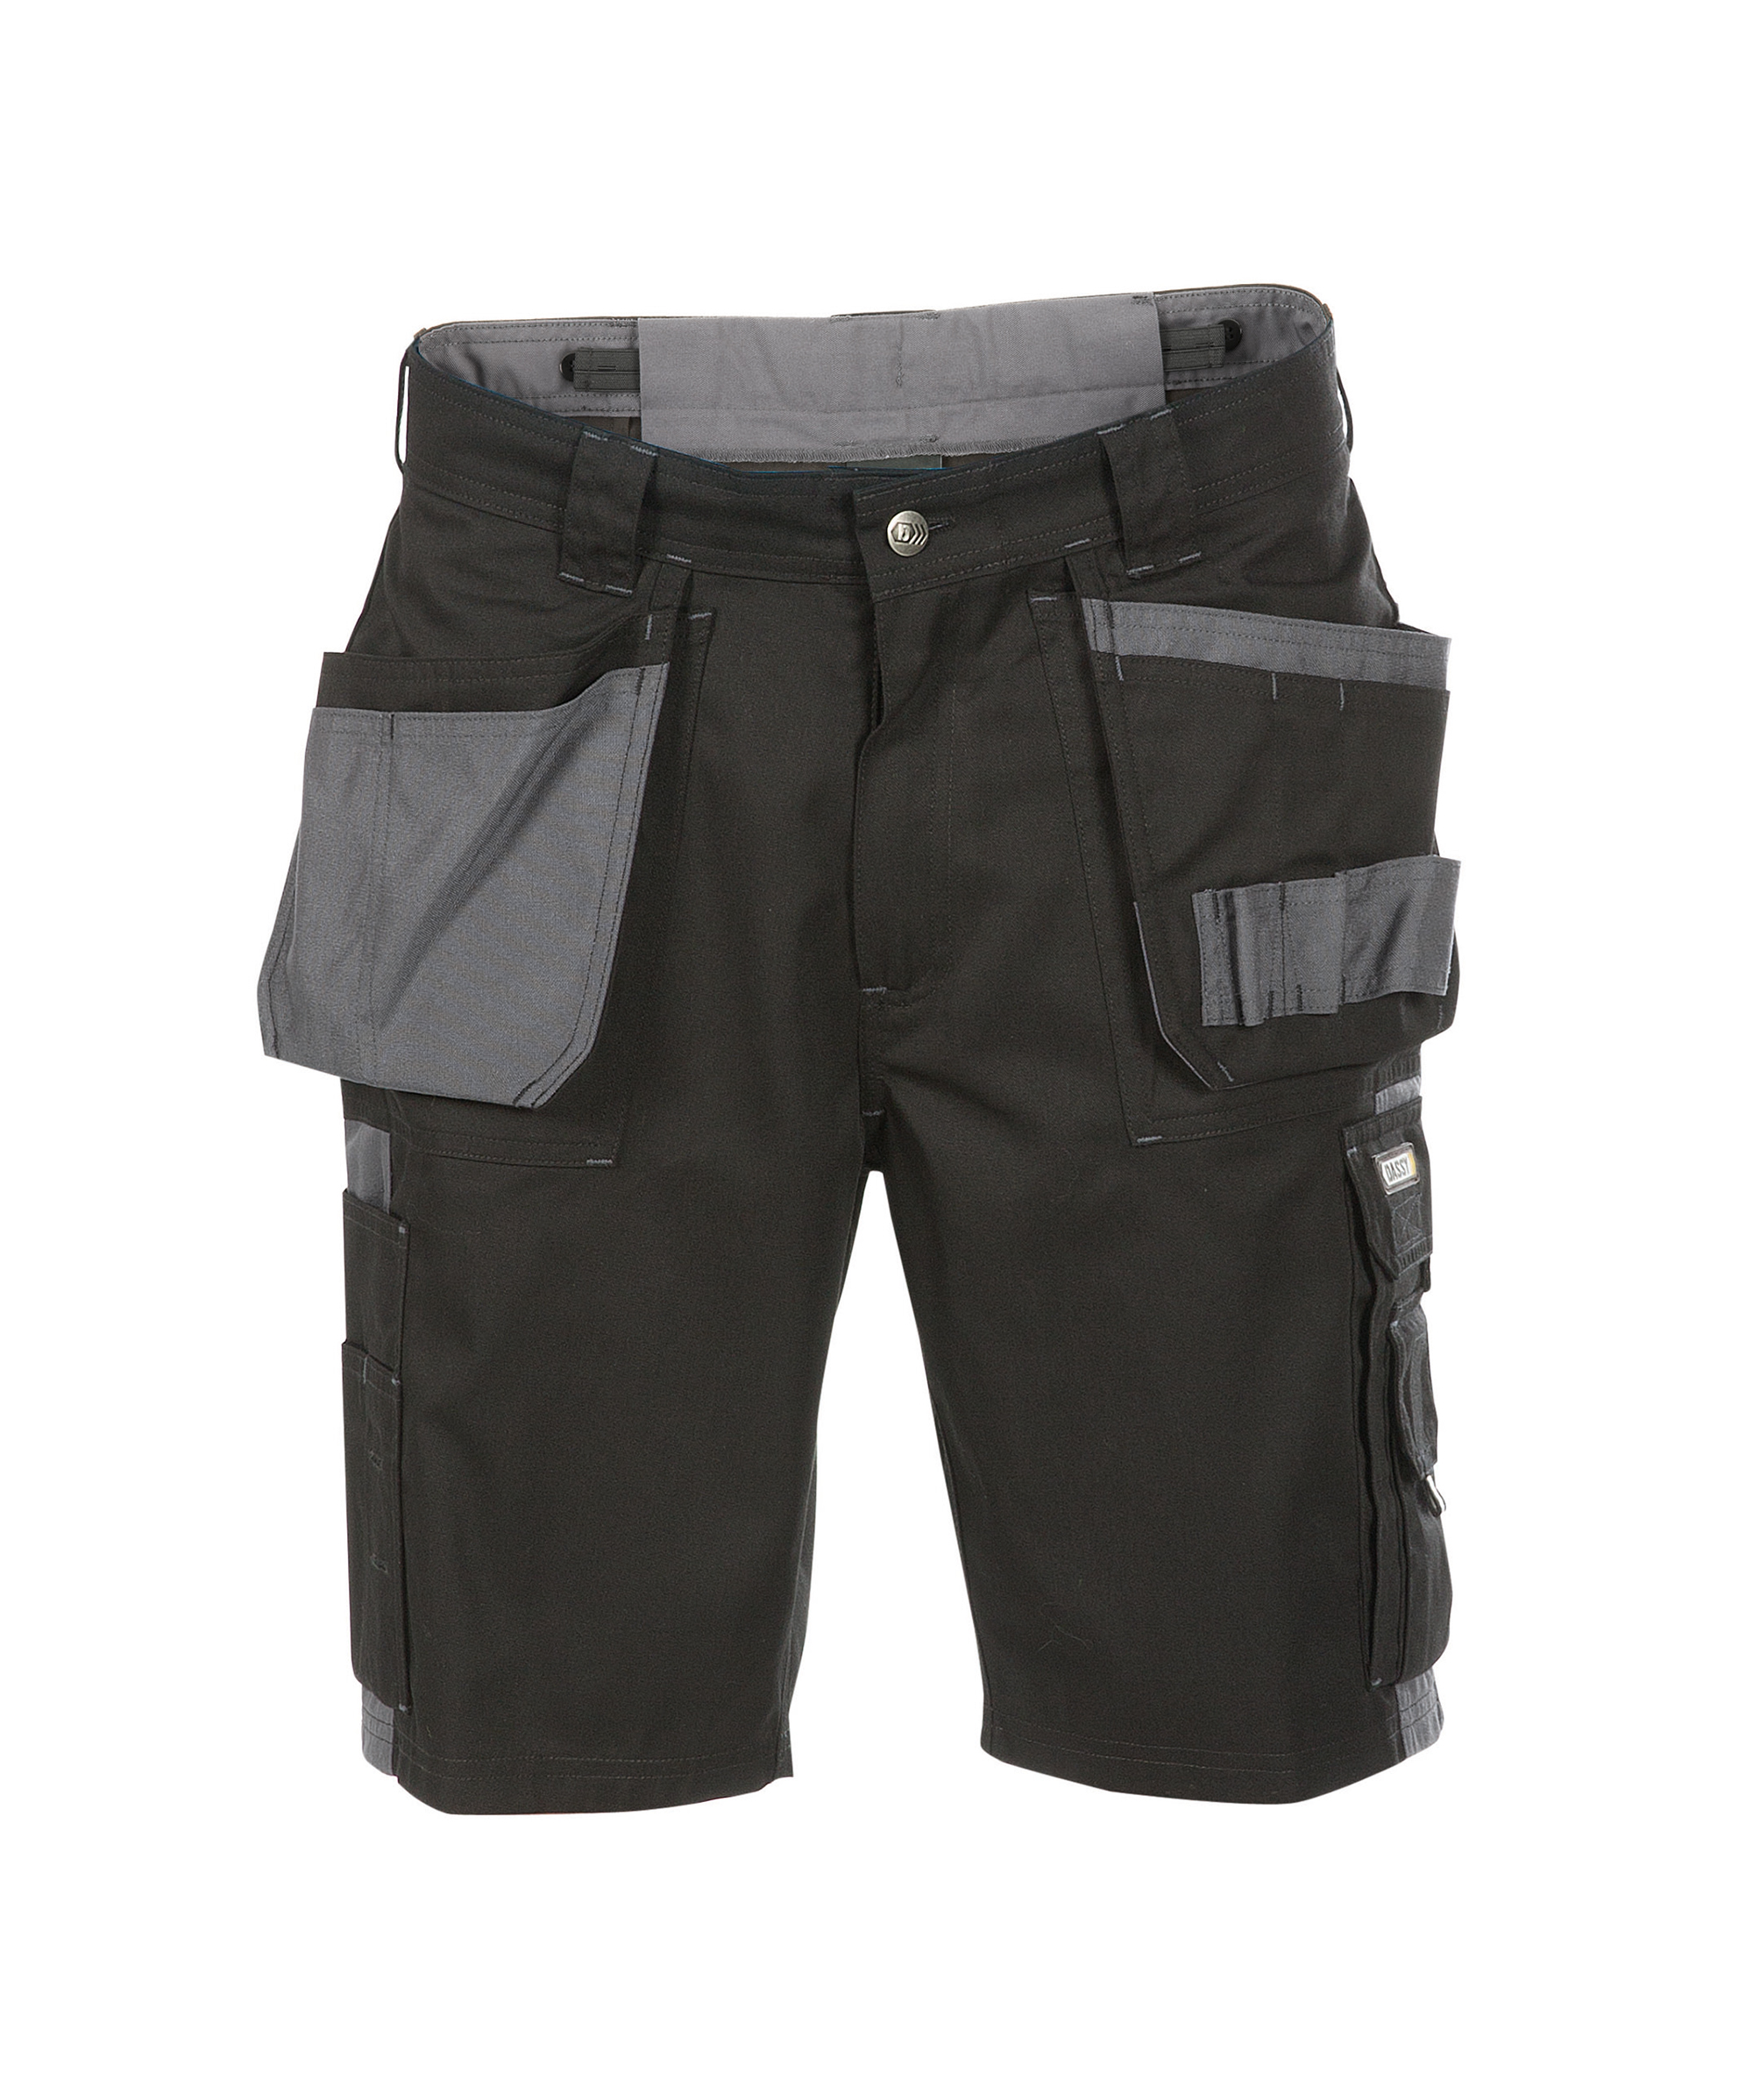 monza_two-tone-work-shorts-with-multi-pockets_black-cement-grey_front.jpg